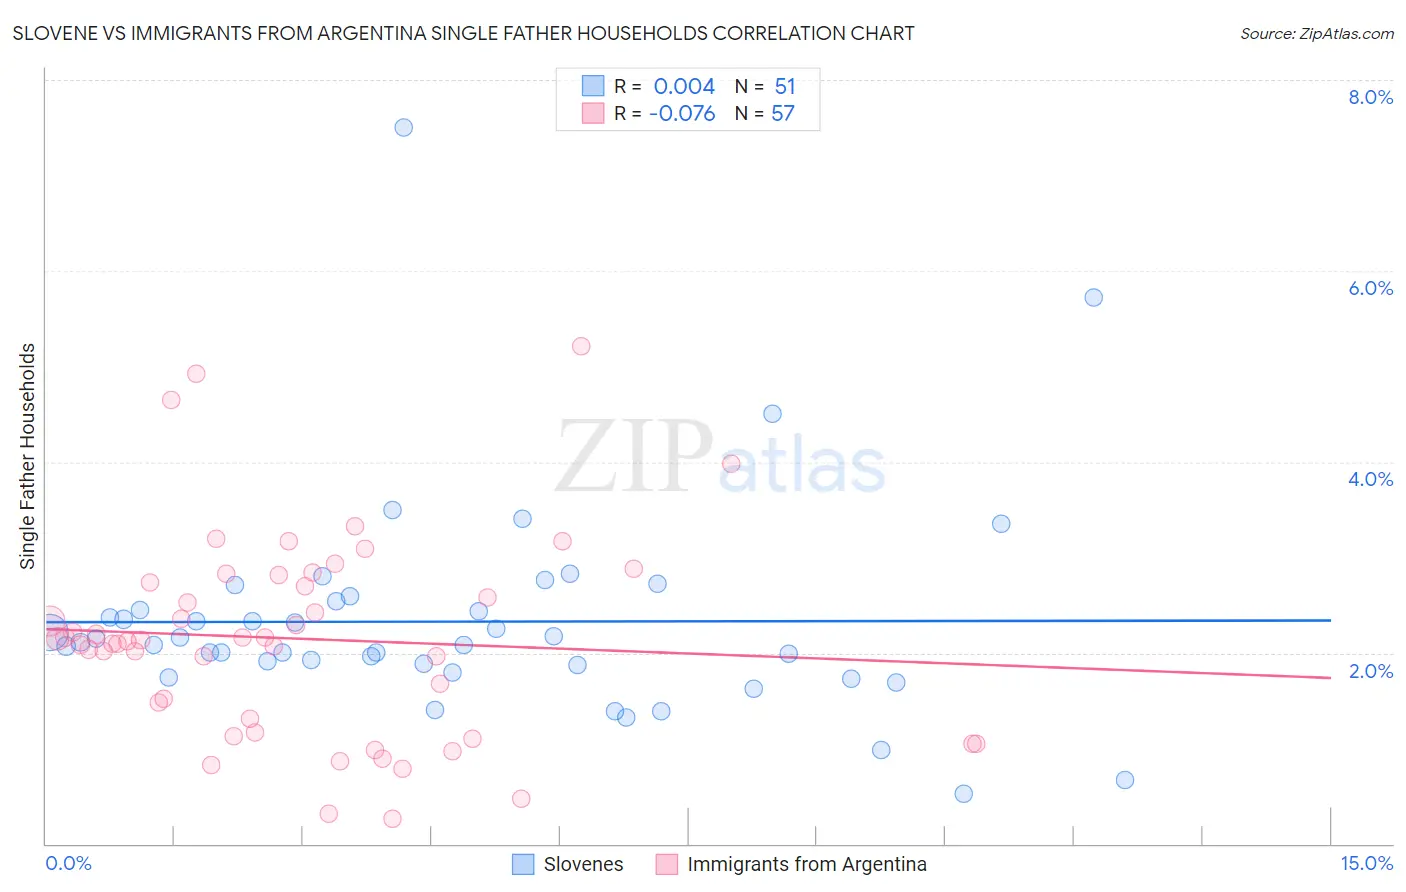 Slovene vs Immigrants from Argentina Single Father Households